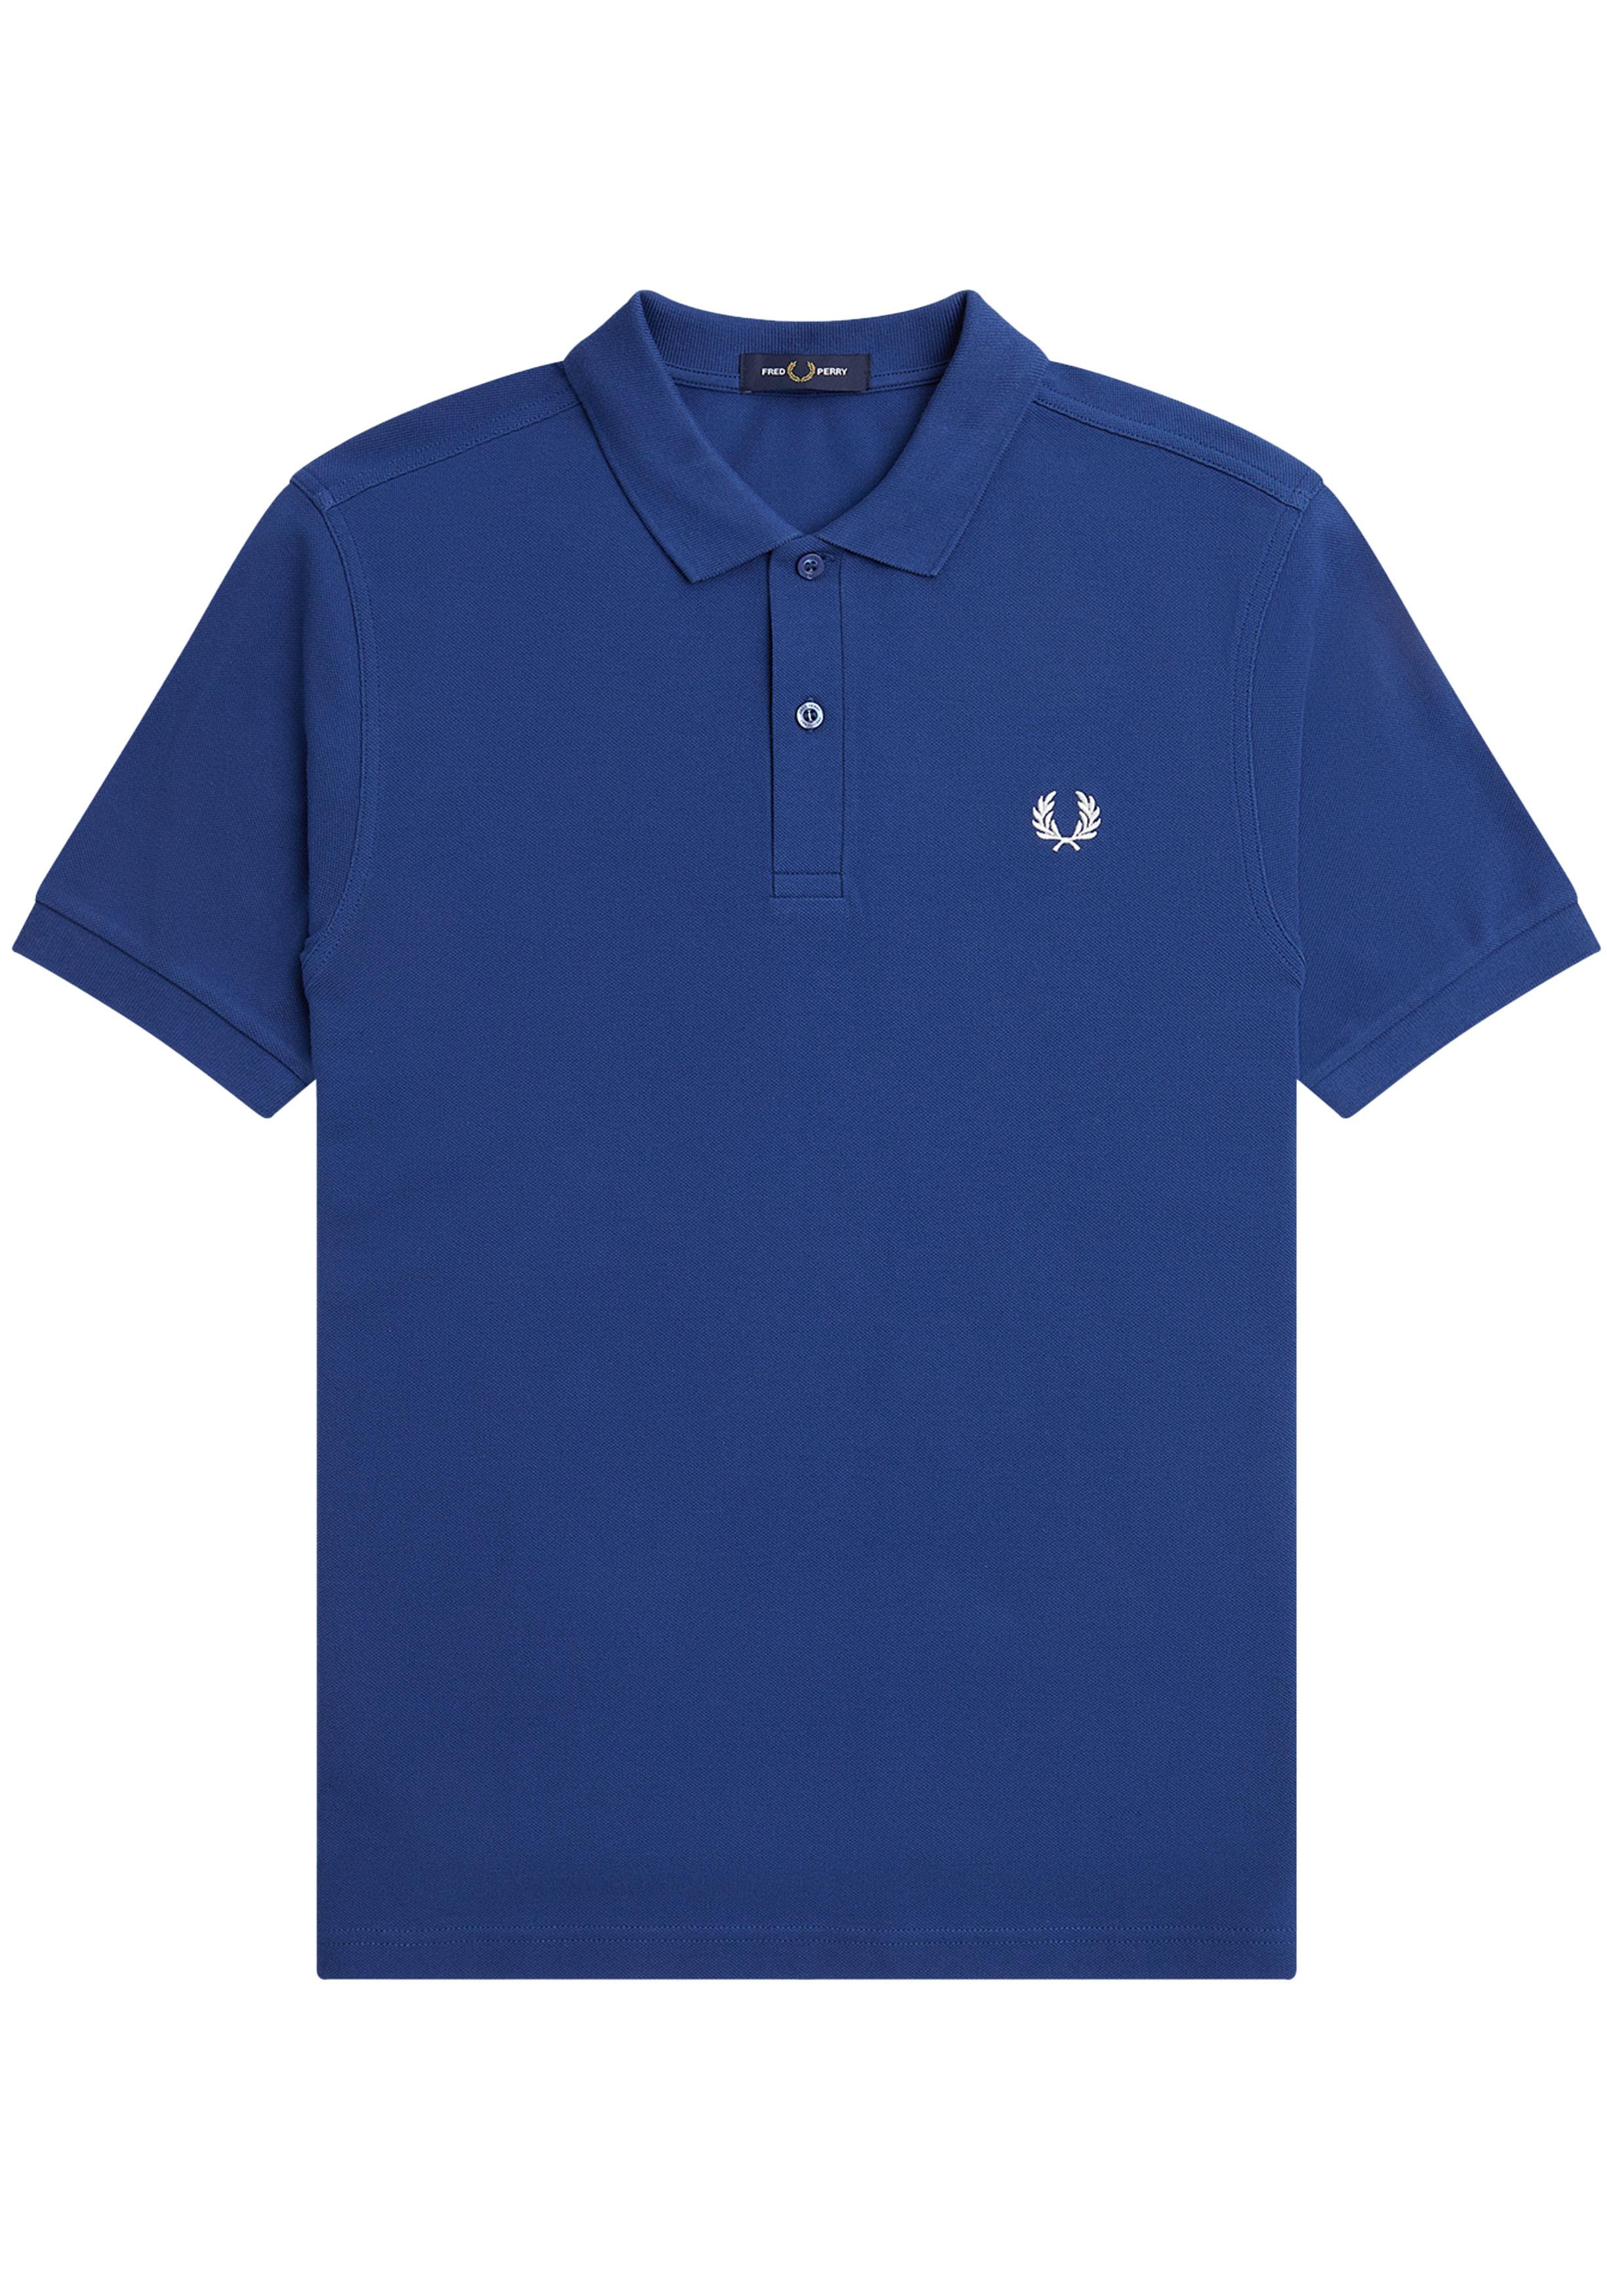 Fred Perry M3600 polo twin tipped shirt, pique, Shaded Cobalt